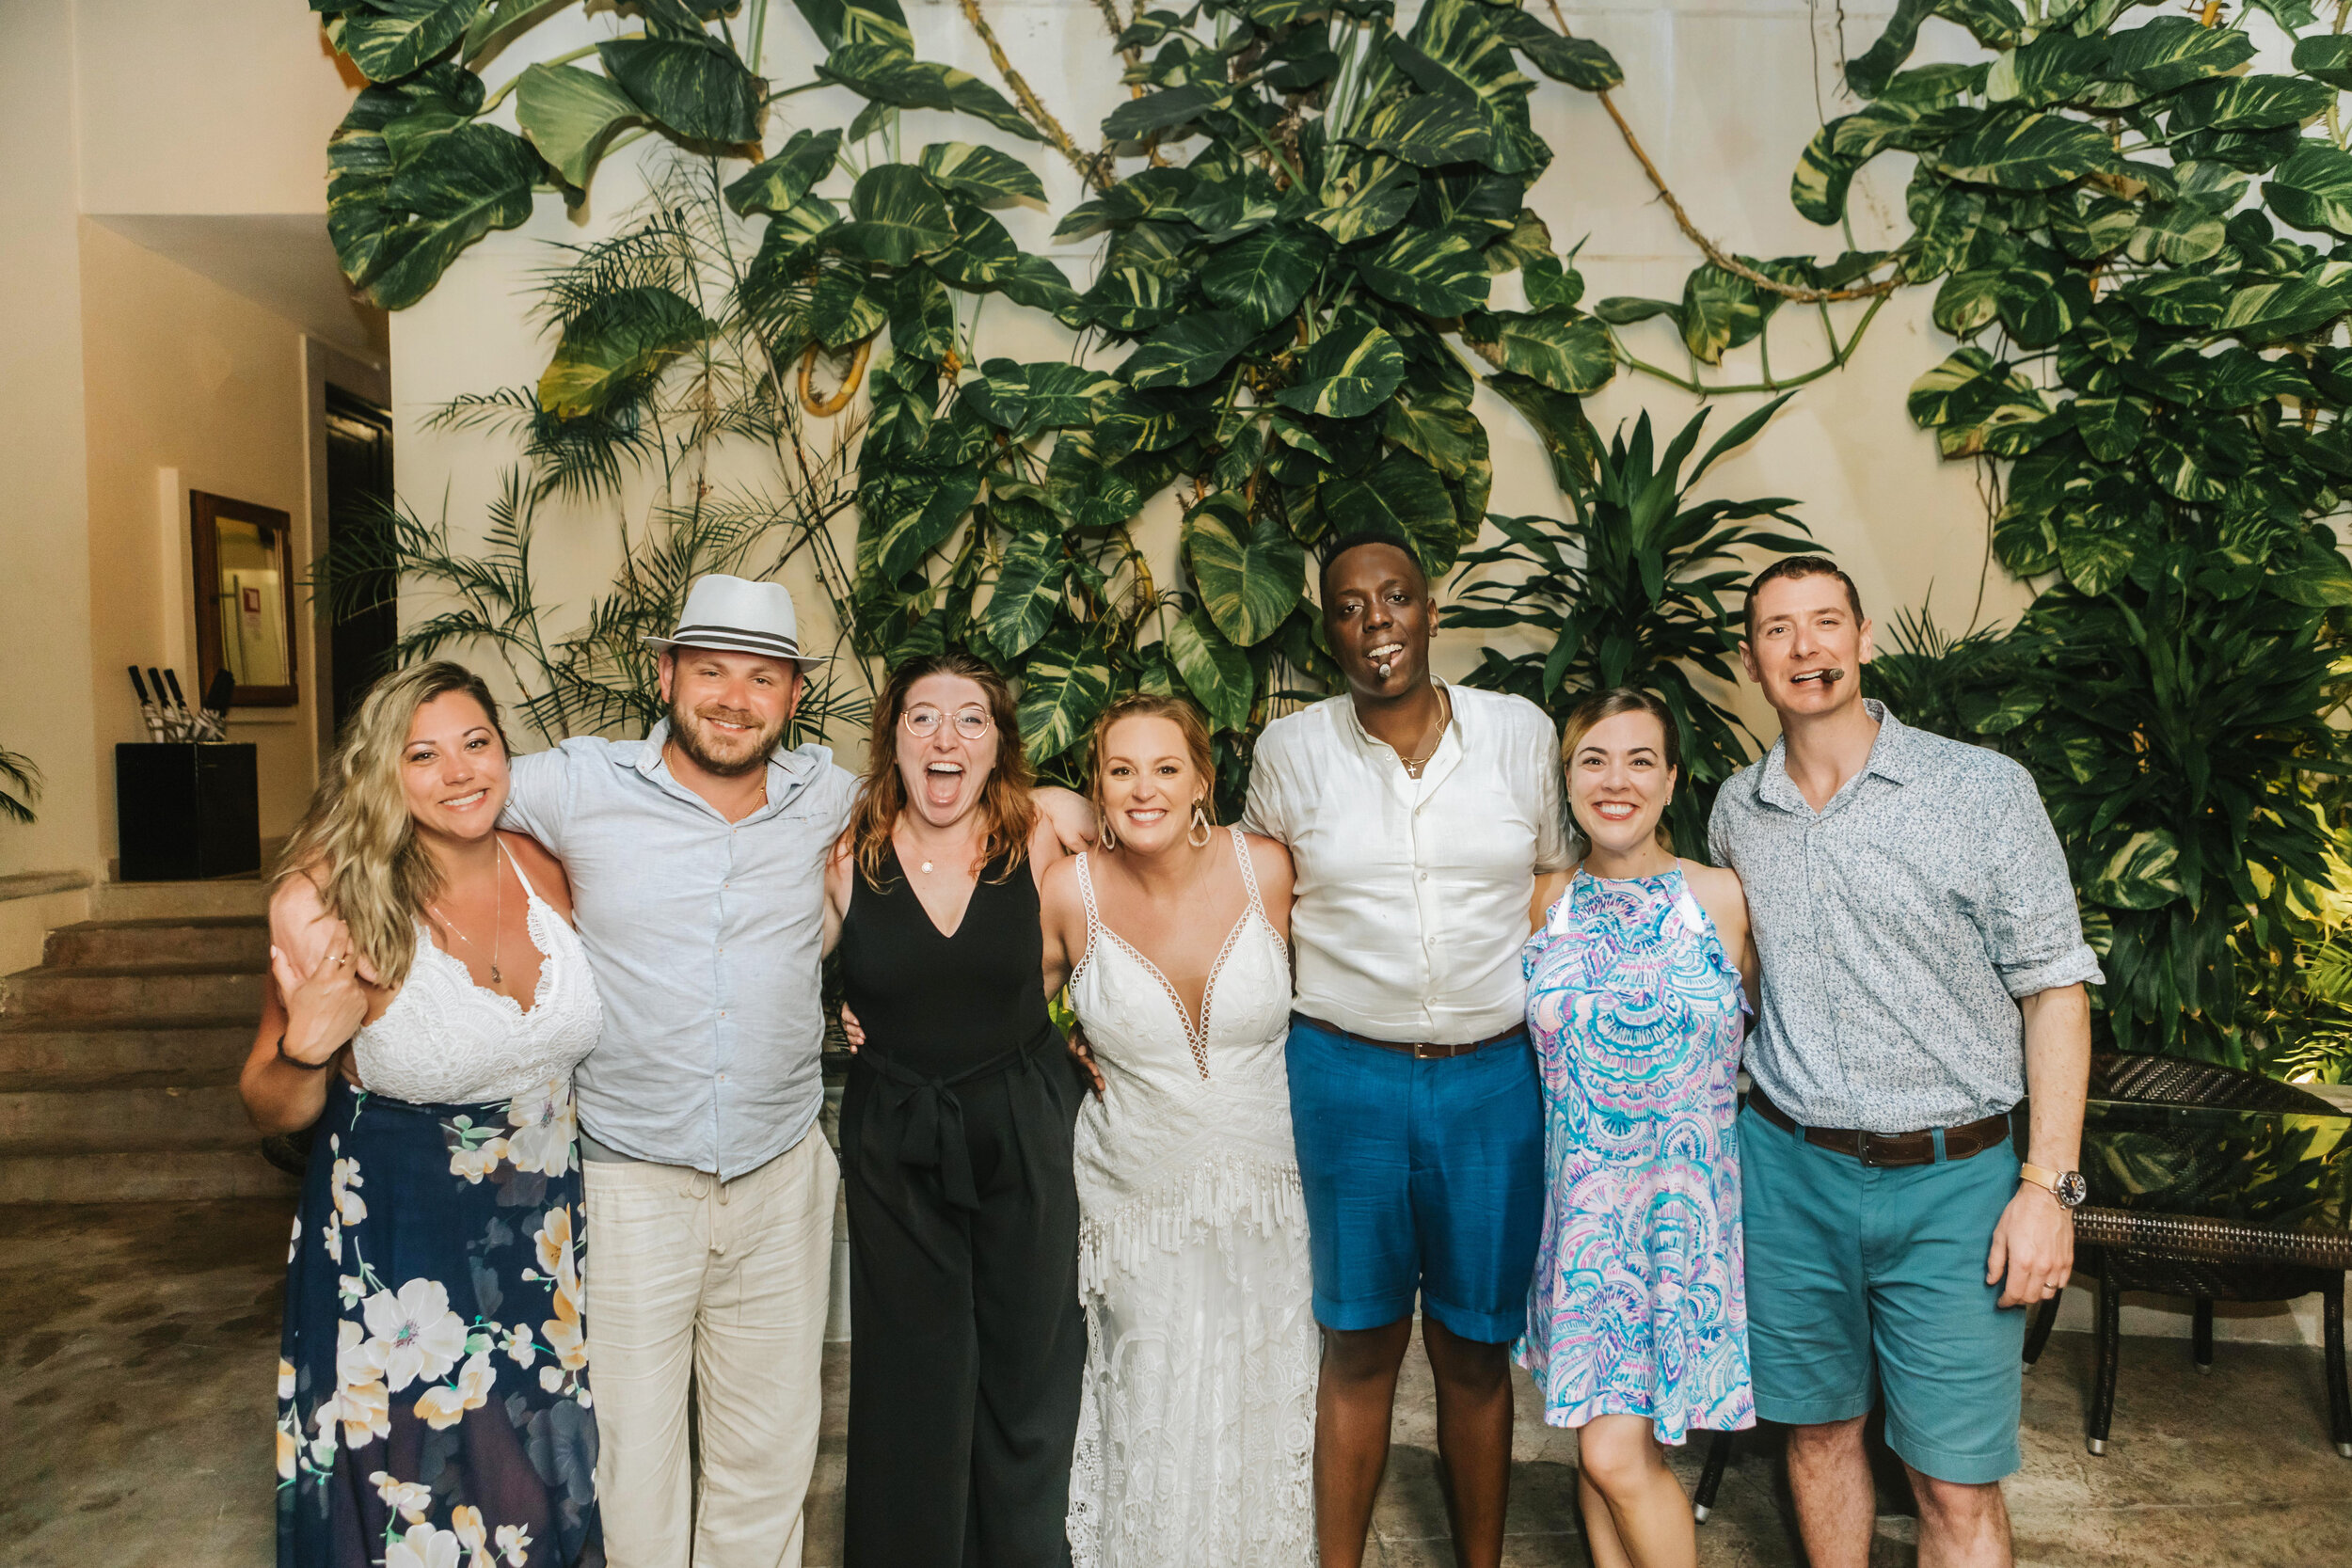 All these couples have been LM couples as far back as 2014! And I got to enjoy a week long vaca with all of them for Steph &amp; Ivin's epic wedding in Mexico! HOW AMAZING! MY HEART!